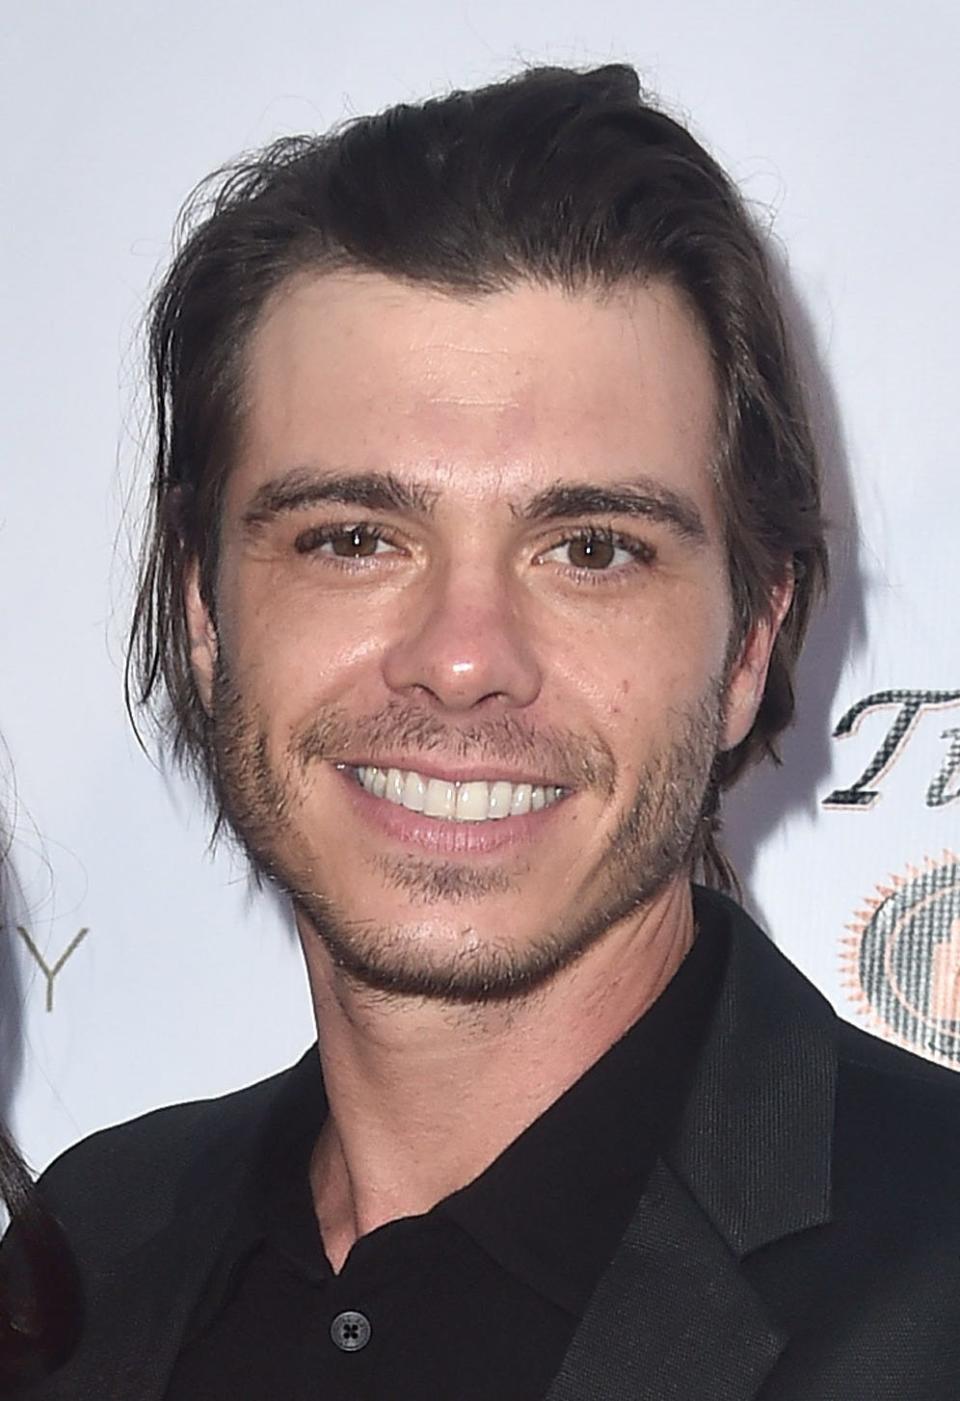 Matthew Lawrence opened up to his brothers about a traumatic experience with an Oscar-winning director and where men fit into the #MeToo movement.